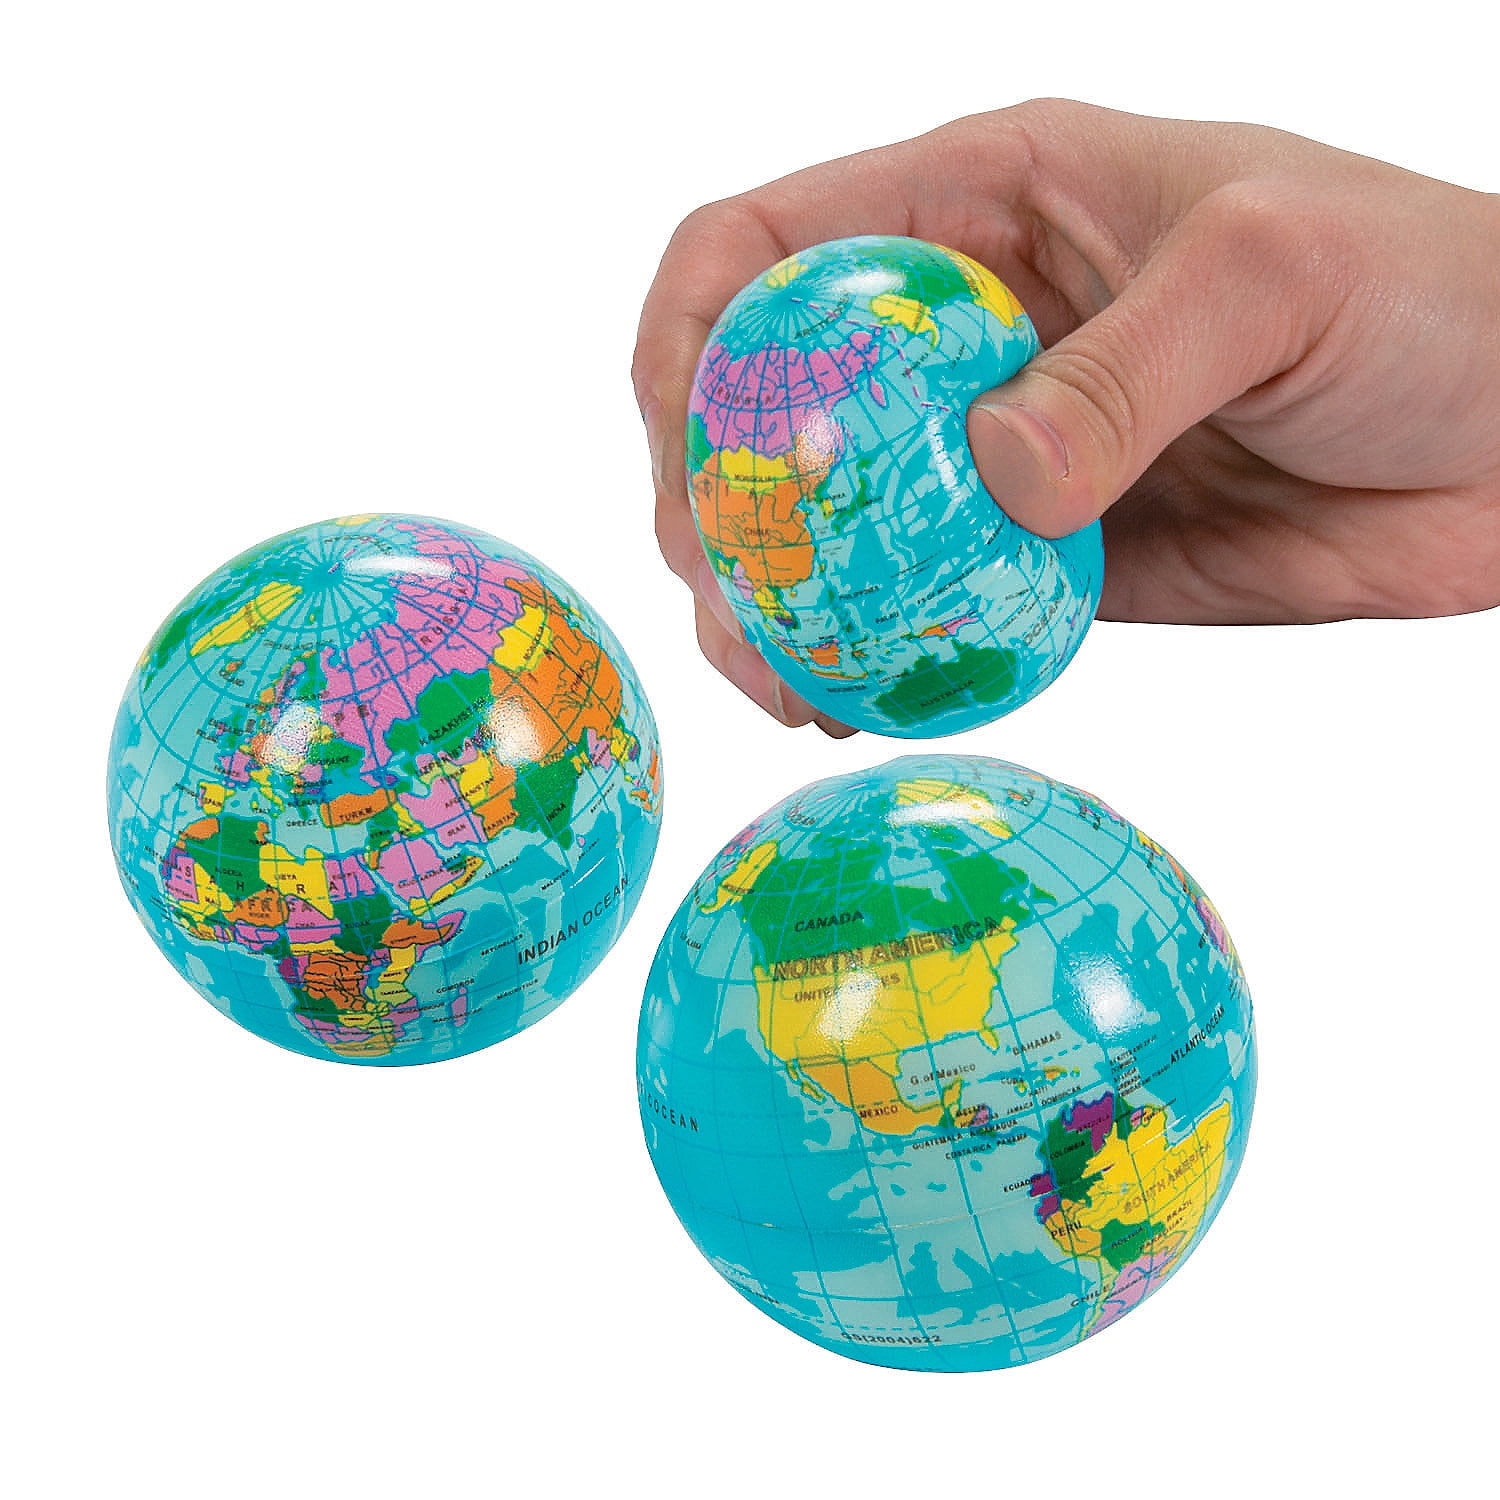 Globe MiMiLive Globe Stress Balls 1 Dozen Earth Foam Squeeze Balls with World Map 2.5 Inch World Stress Ball Earth Stress Relief for Class/Pressure Relief/Party Favor 